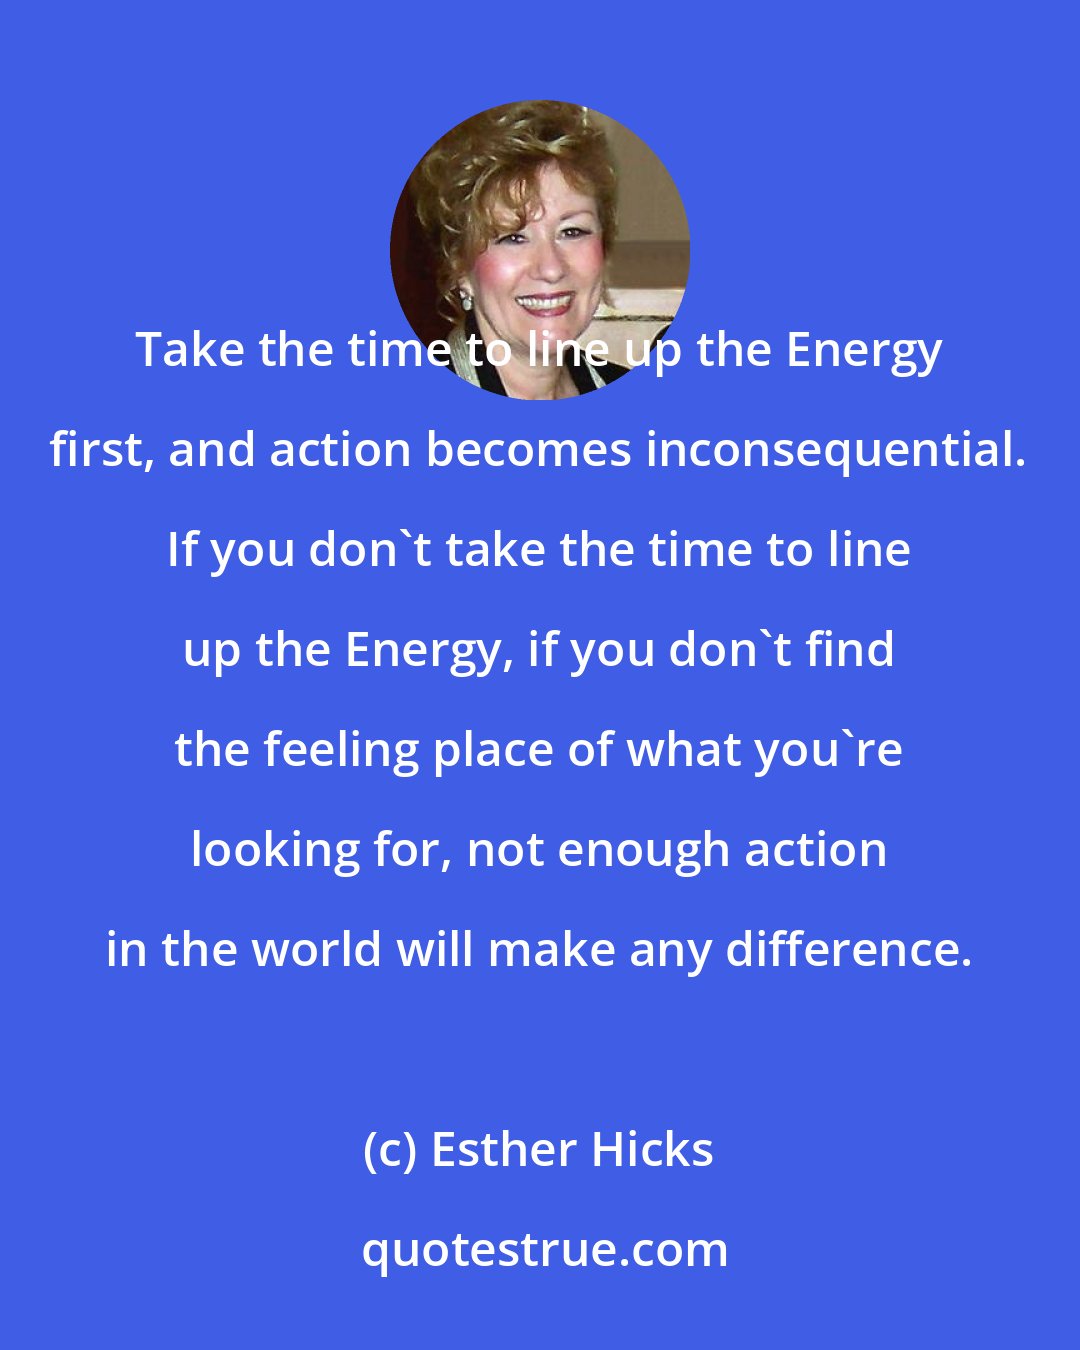 Esther Hicks: Take the time to line up the Energy first, and action becomes inconsequential. If you don't take the time to line up the Energy, if you don't find the feeling place of what you're looking for, not enough action in the world will make any difference.